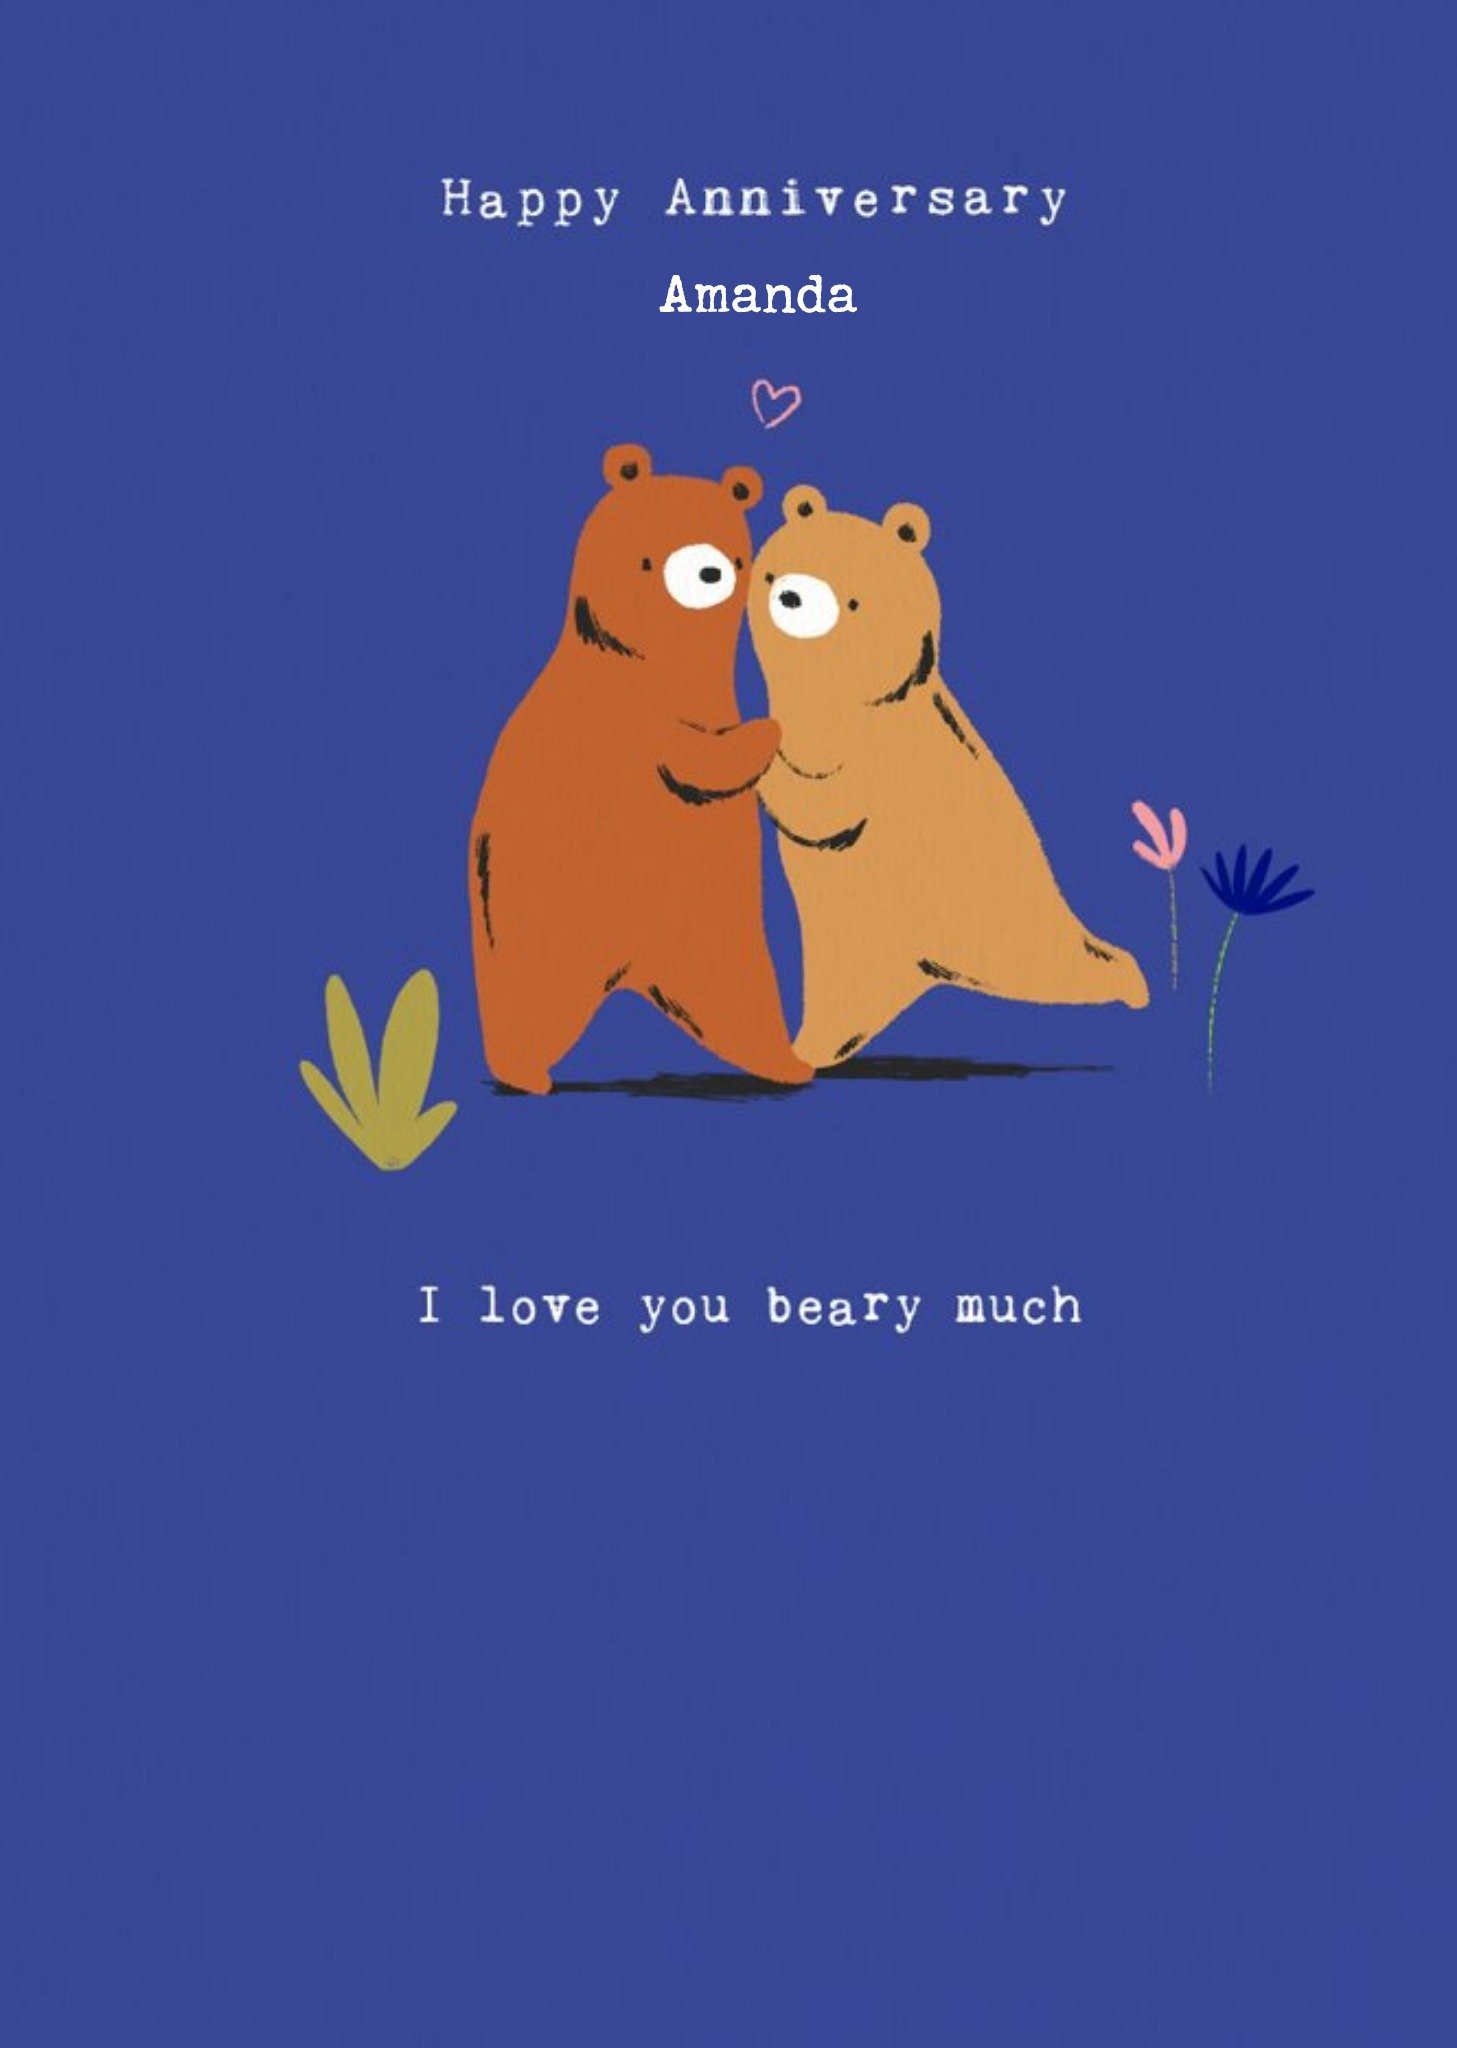 Moonpig Cute Illustration Of Two Bears Hugging Each Other I Love You Beary Much Anniversary Card Eca